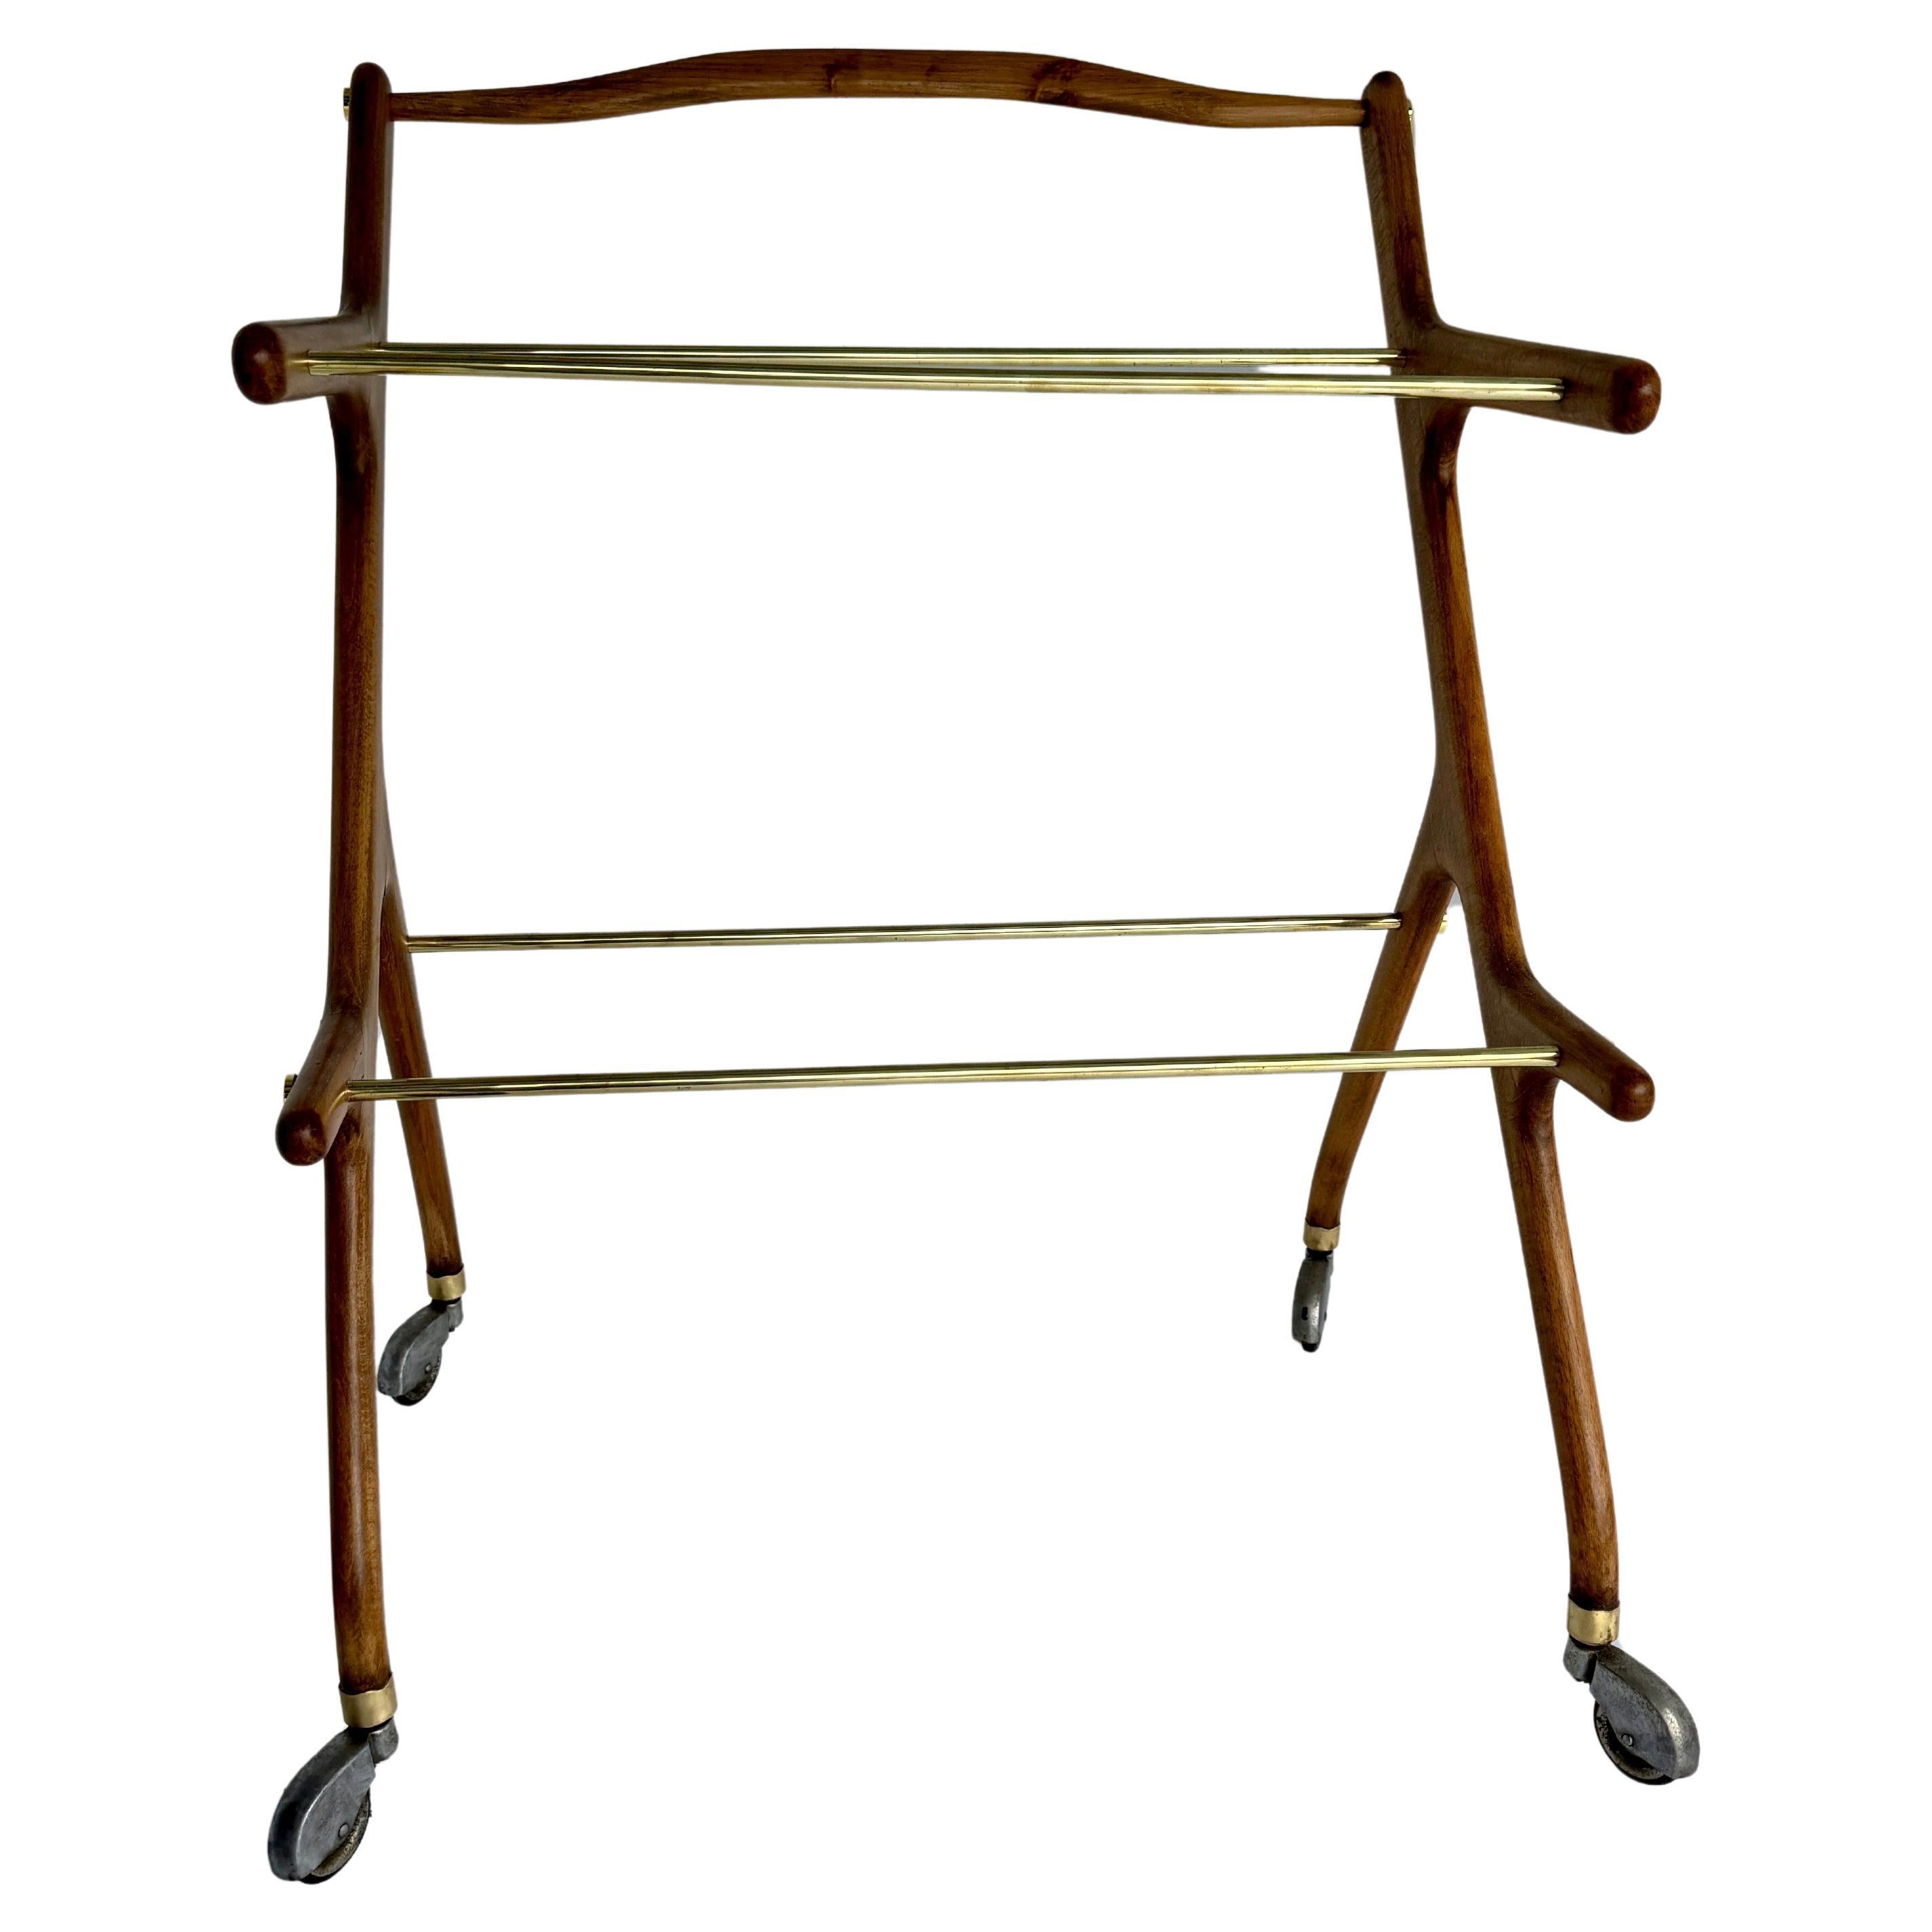 Mid-Century Cesare Lacca Wood and Brass Bar Cart, Italy 1950-60's 

Stunning bar cart featuring. Wonderful stained wood featuring elegant brass accents. Original brass wheels complete this amazing architectural work of art.